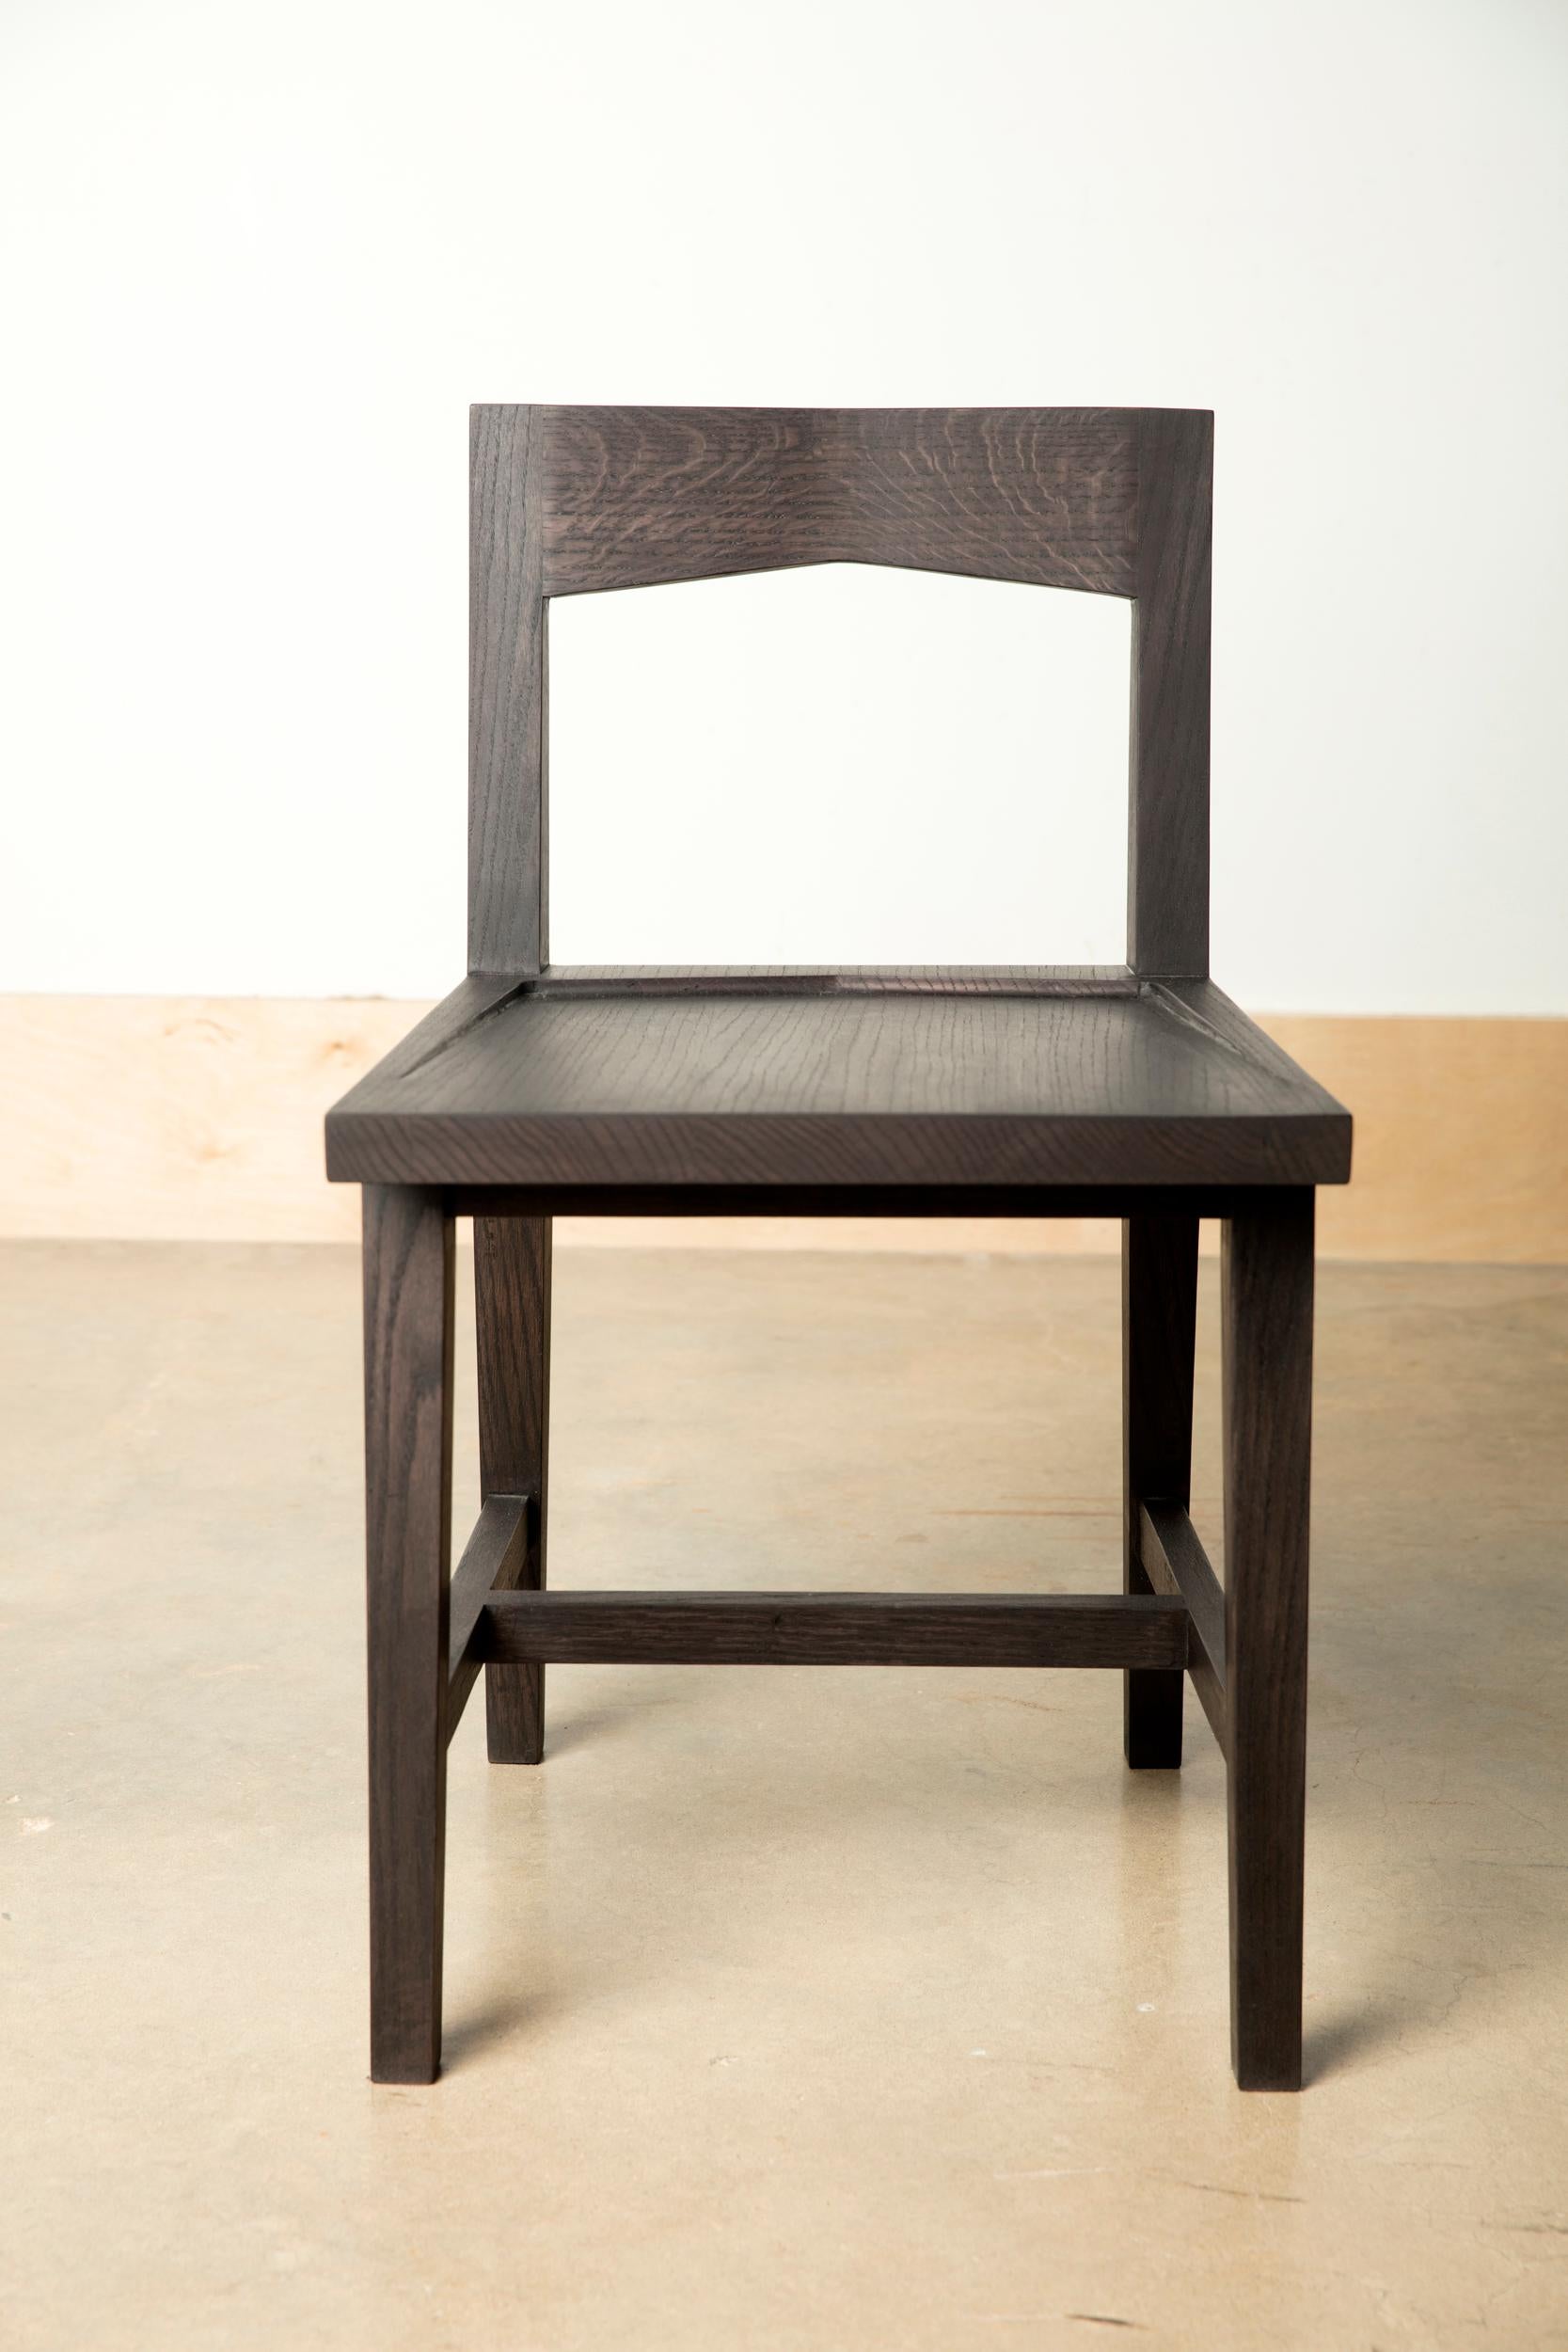 American Craftsman Writing or Computer Desk and Chair in Blackened Oakwood by Alabama Sawyer